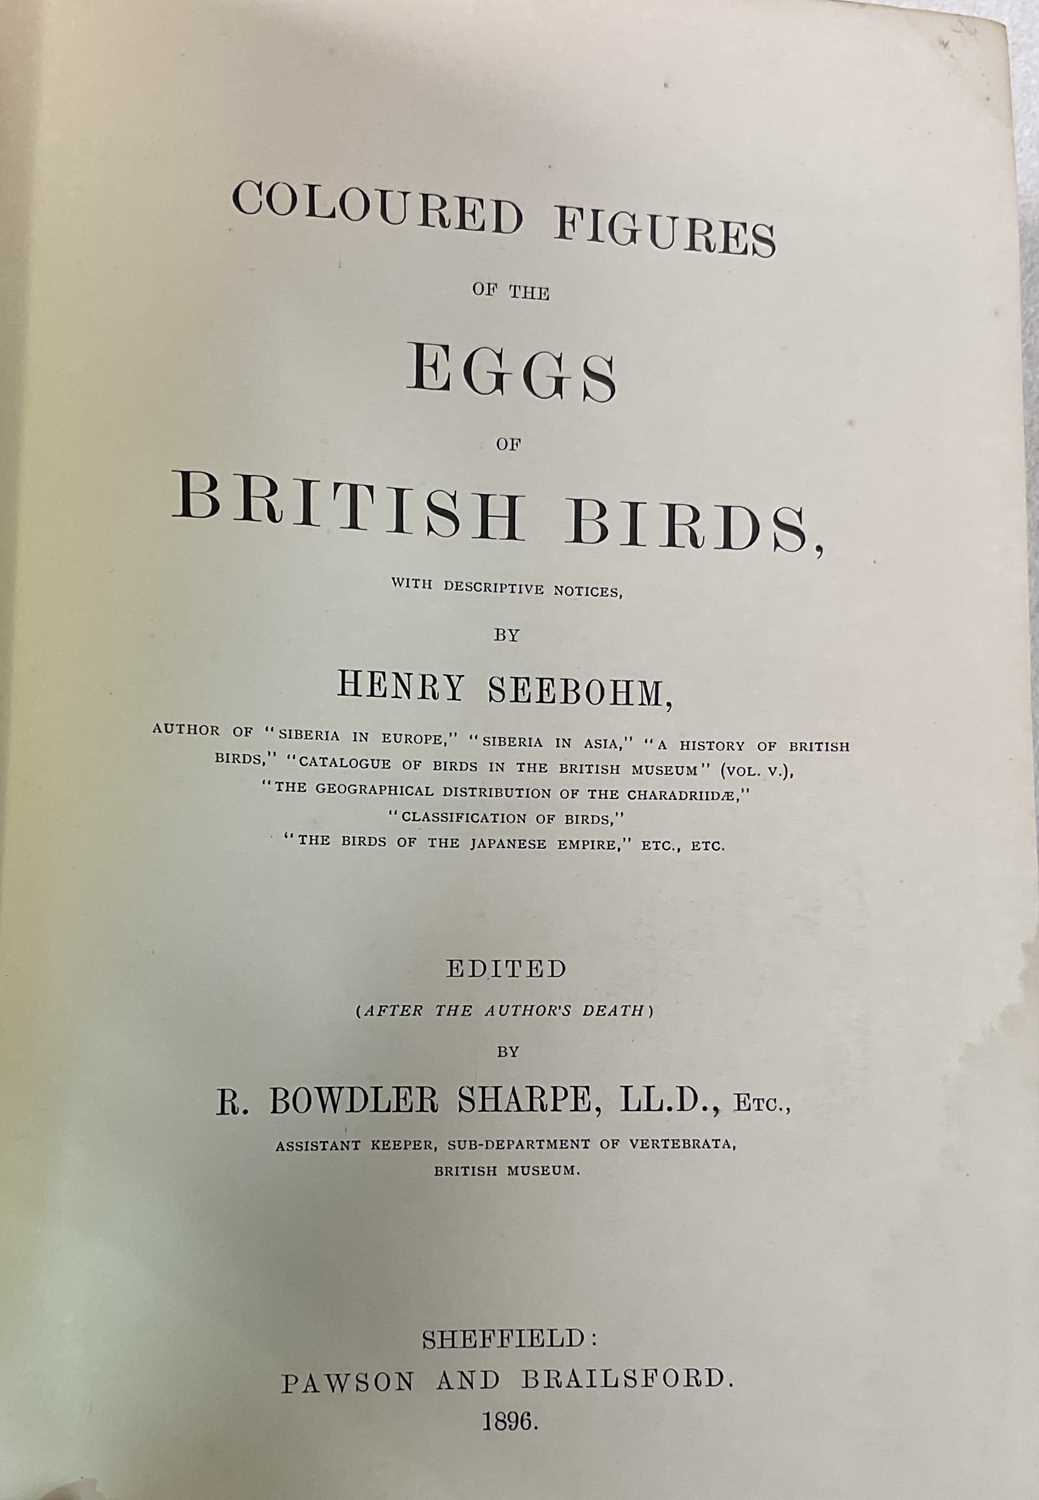 HENRY SEEBOHM & R. BOWDLER-SHARPE; 'Coloured Figures of the Eggs of British Birds', with numerous - Image 3 of 6